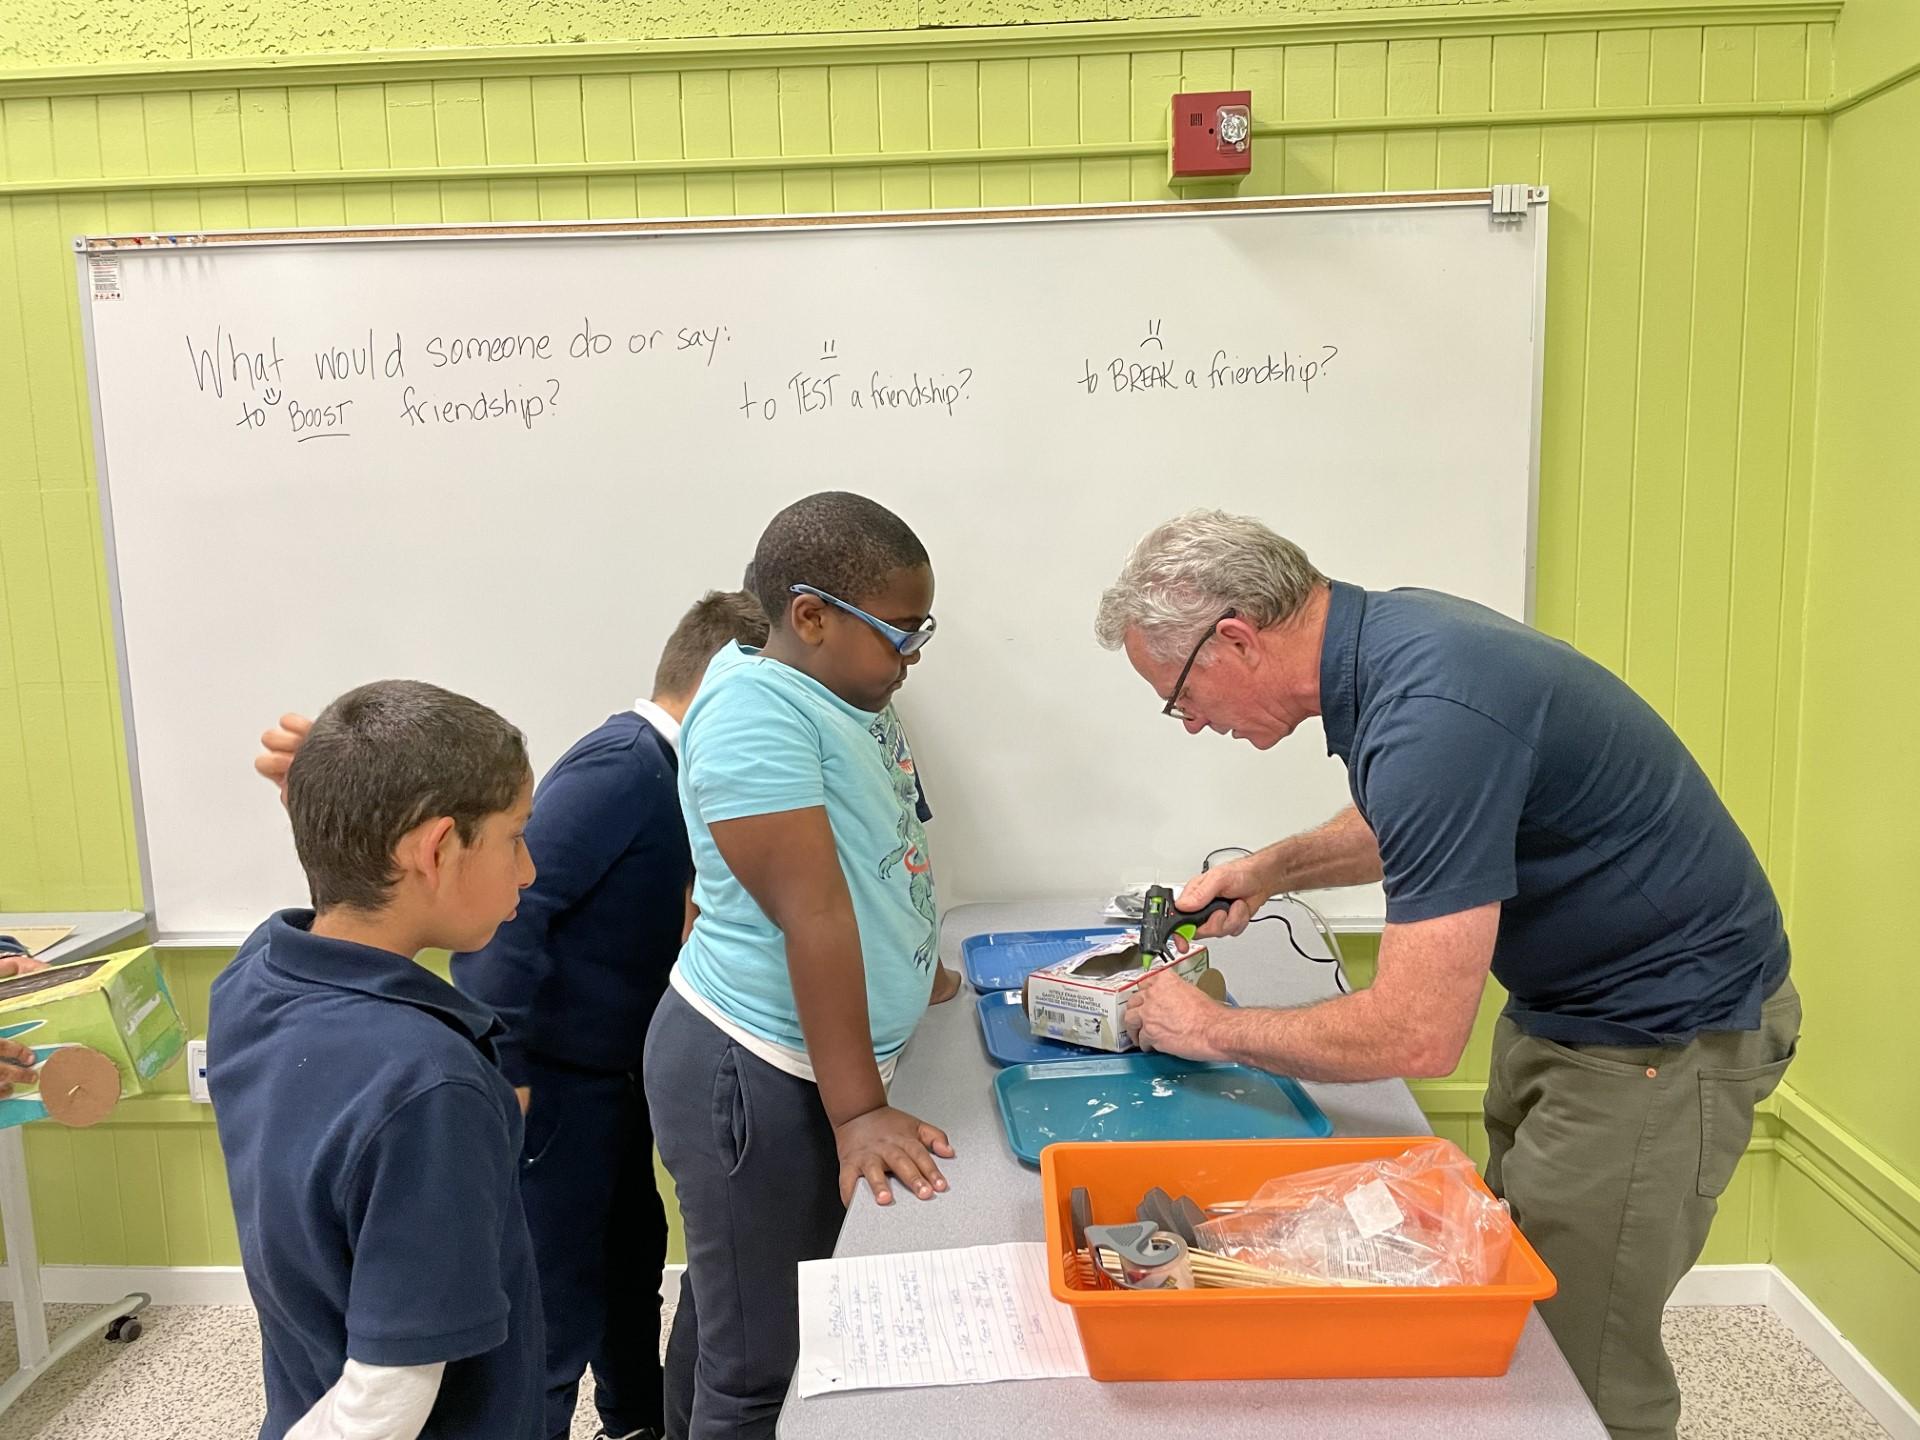 Spruce Elementary fourth grade teacher Paul Summers helps students glue wheels onto their egg racer cars, which the students made out of shoe boxes. 